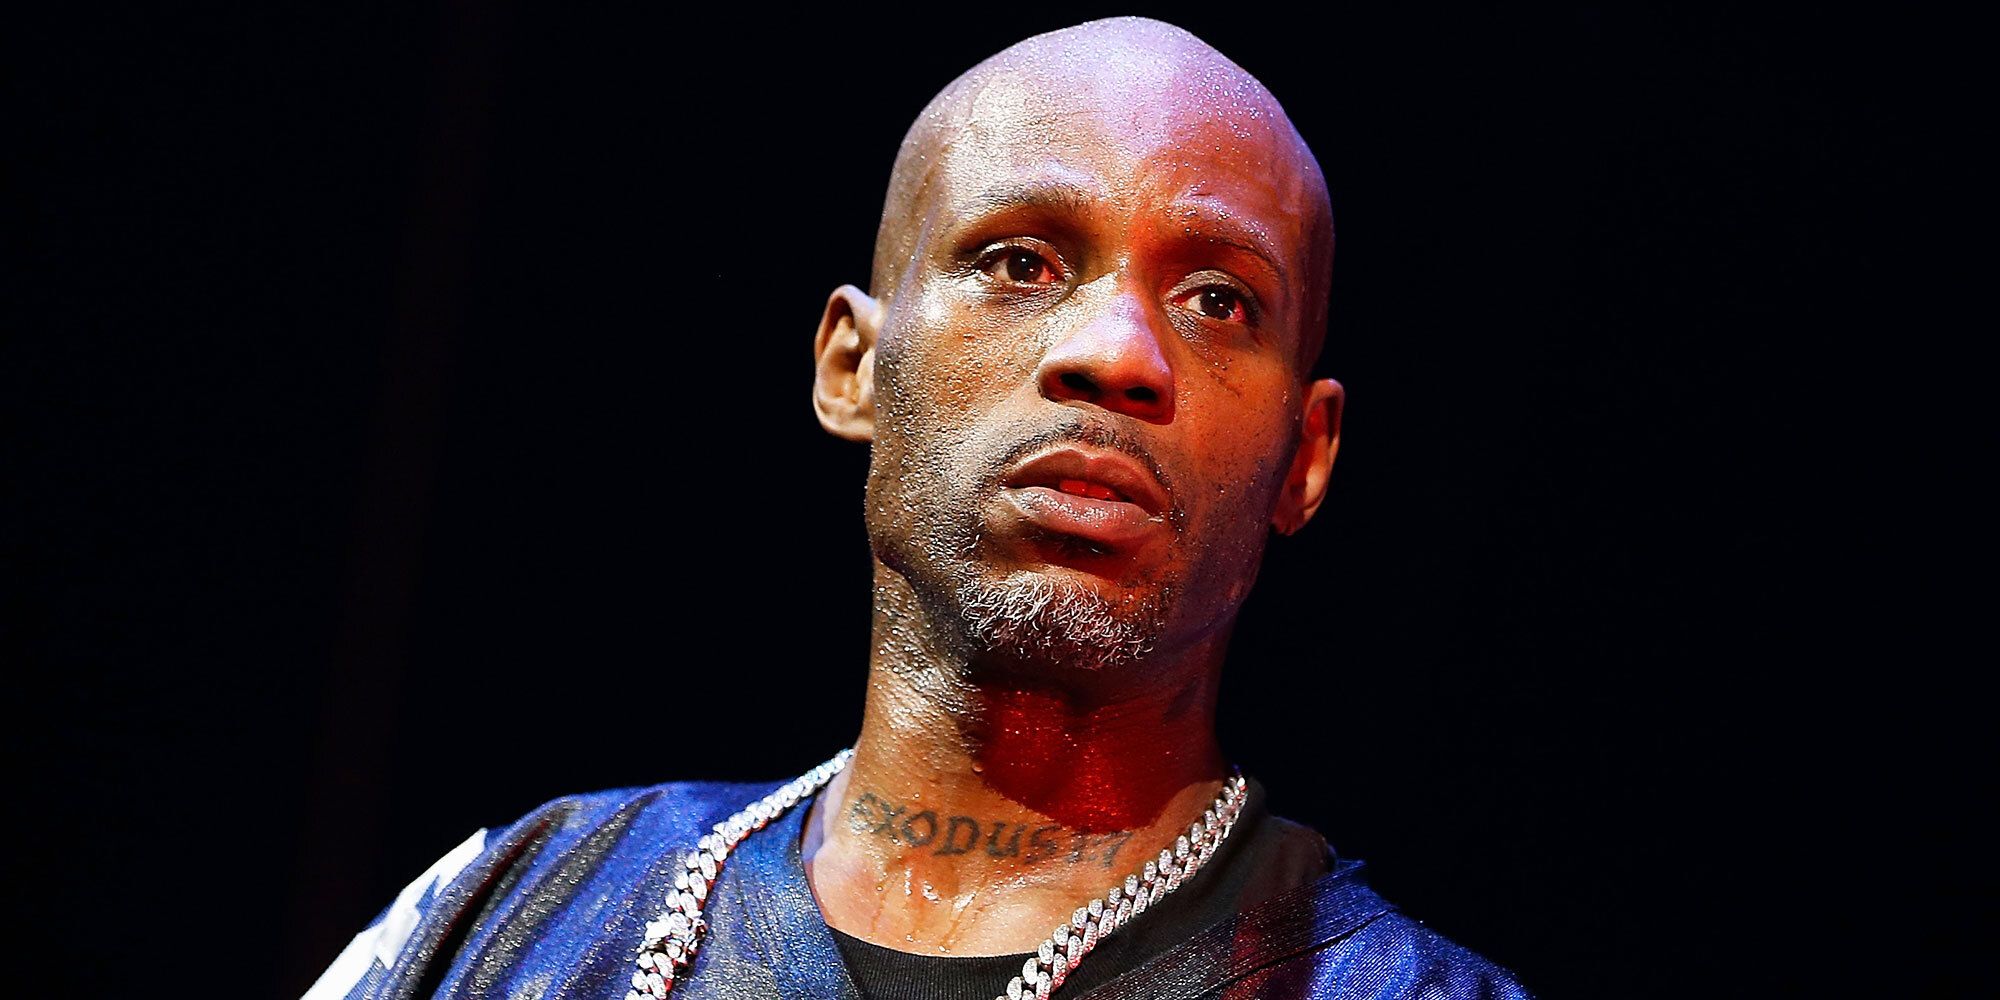 Dmx Has Died At Age 50 According To Family Statement